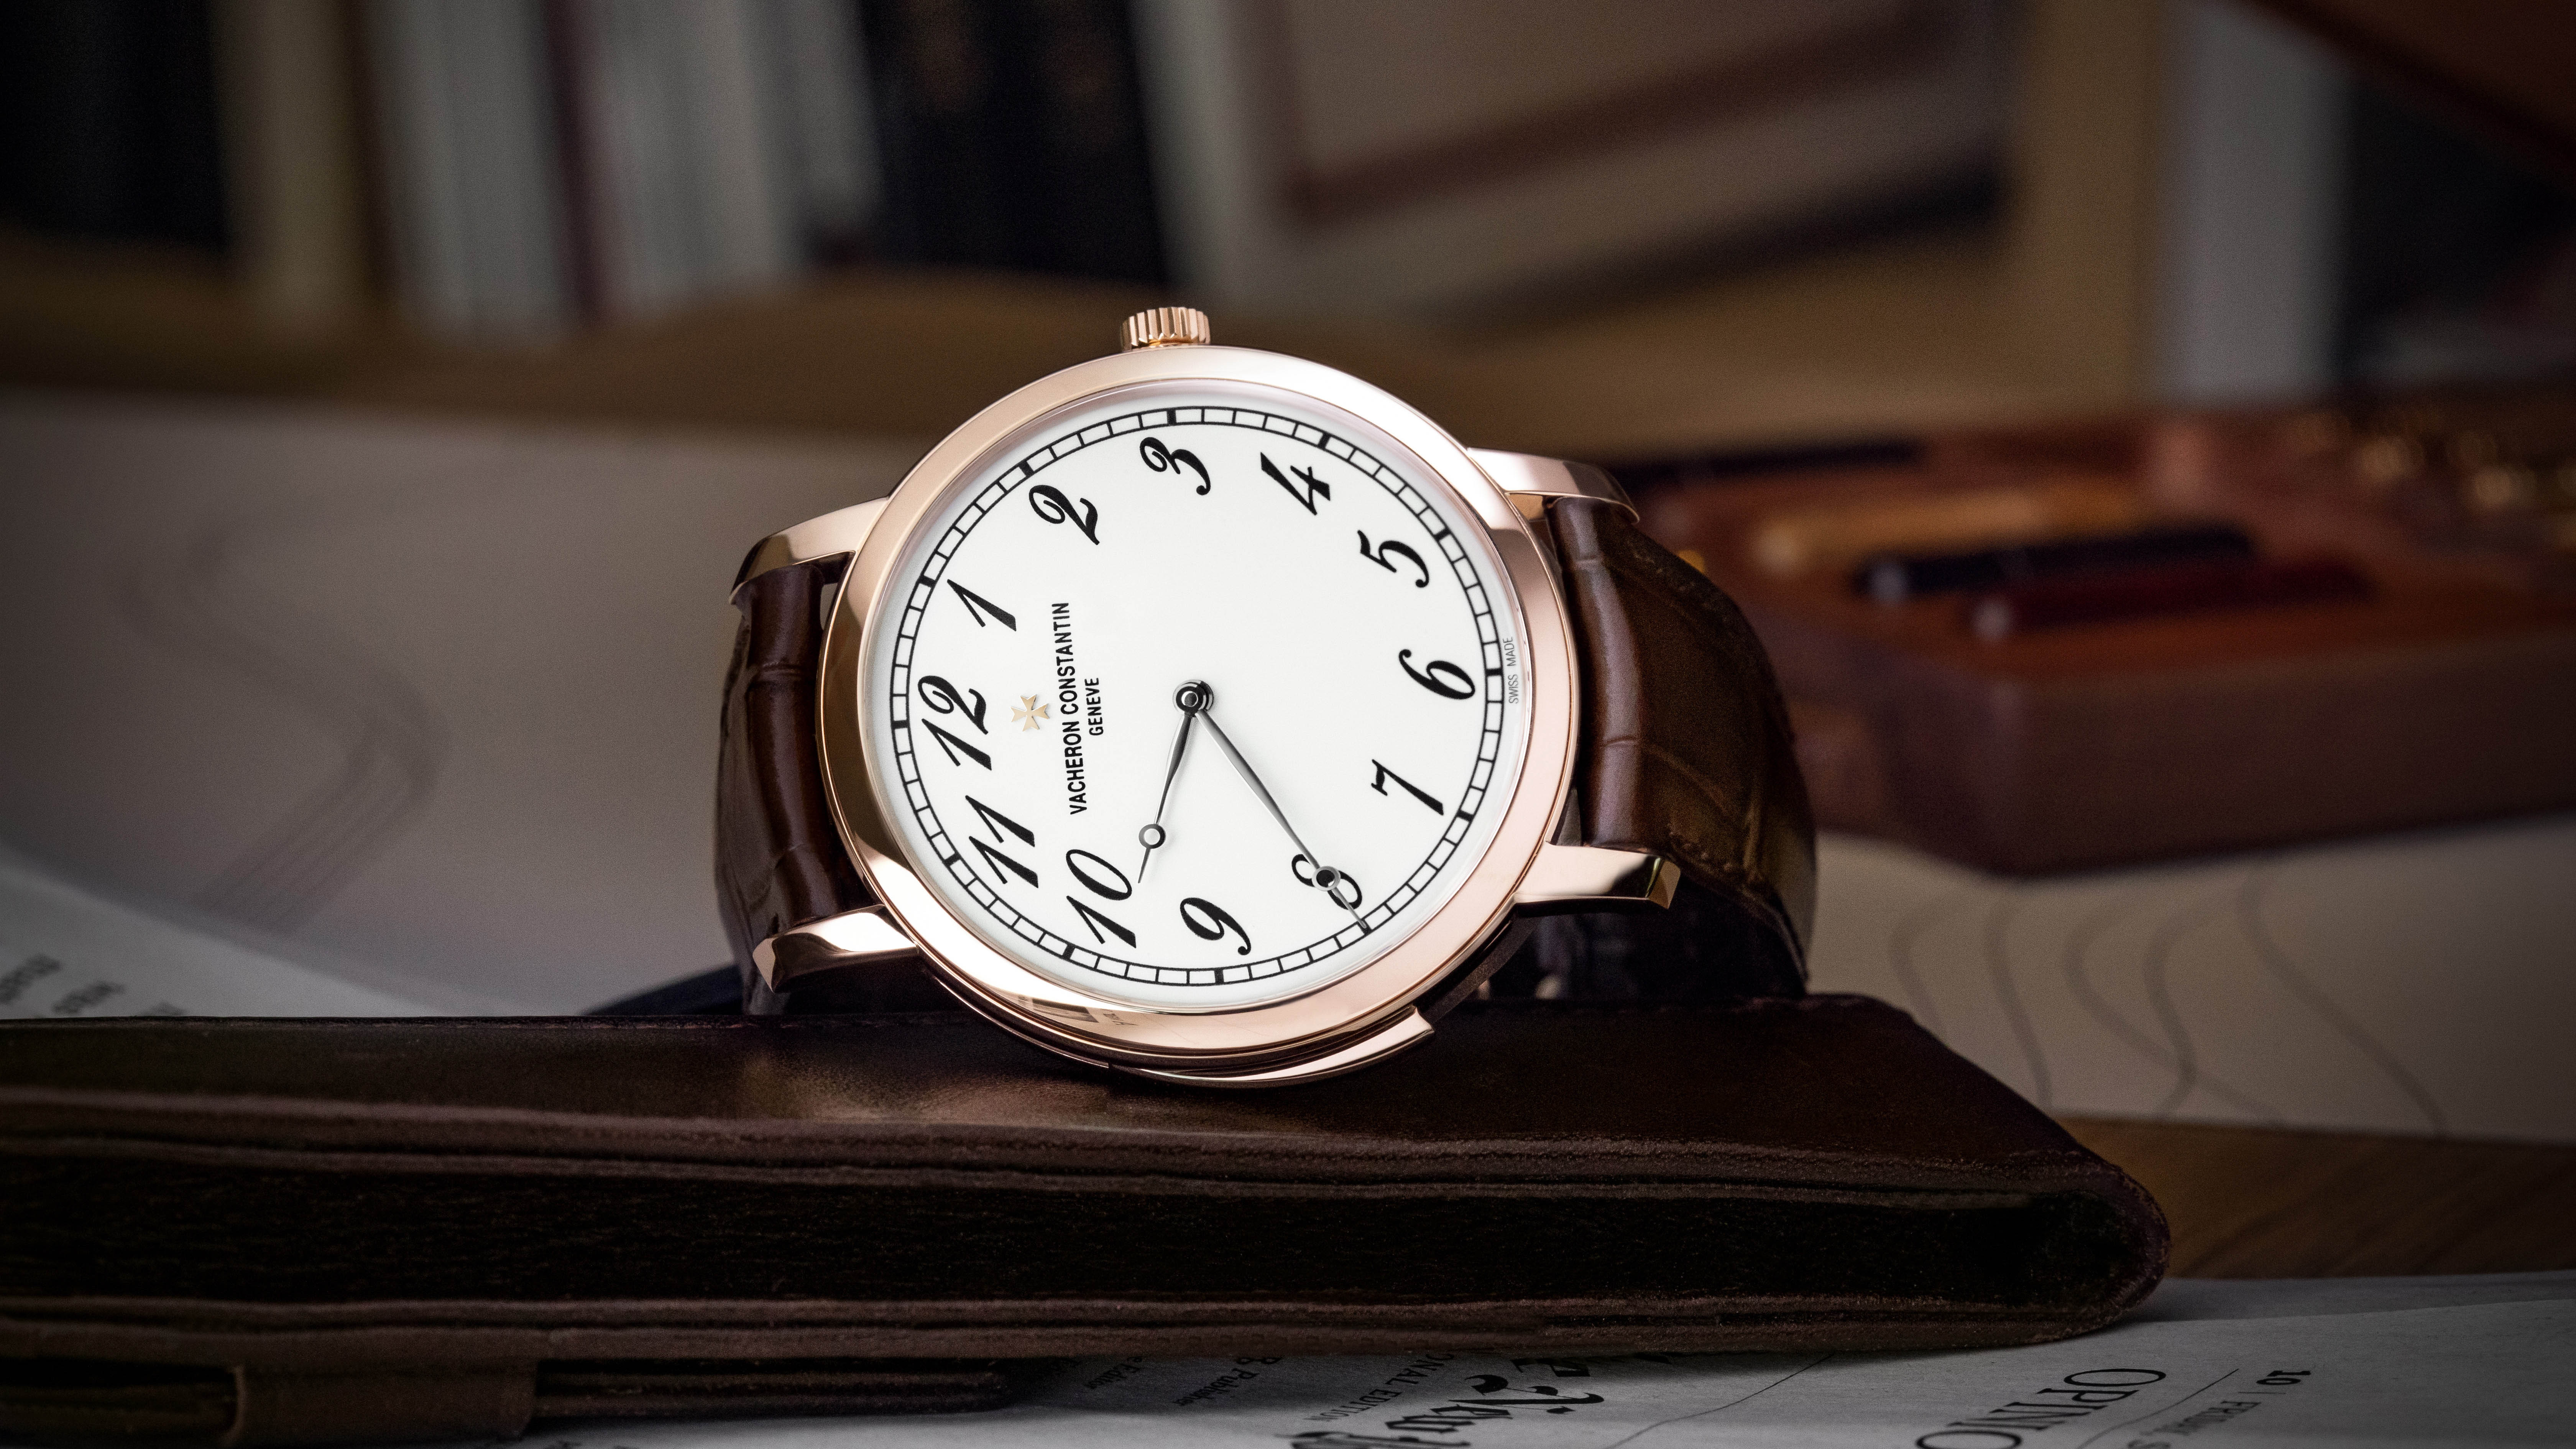 Vacheron Constantin Releases All Gold Watches for Watches & Wonders